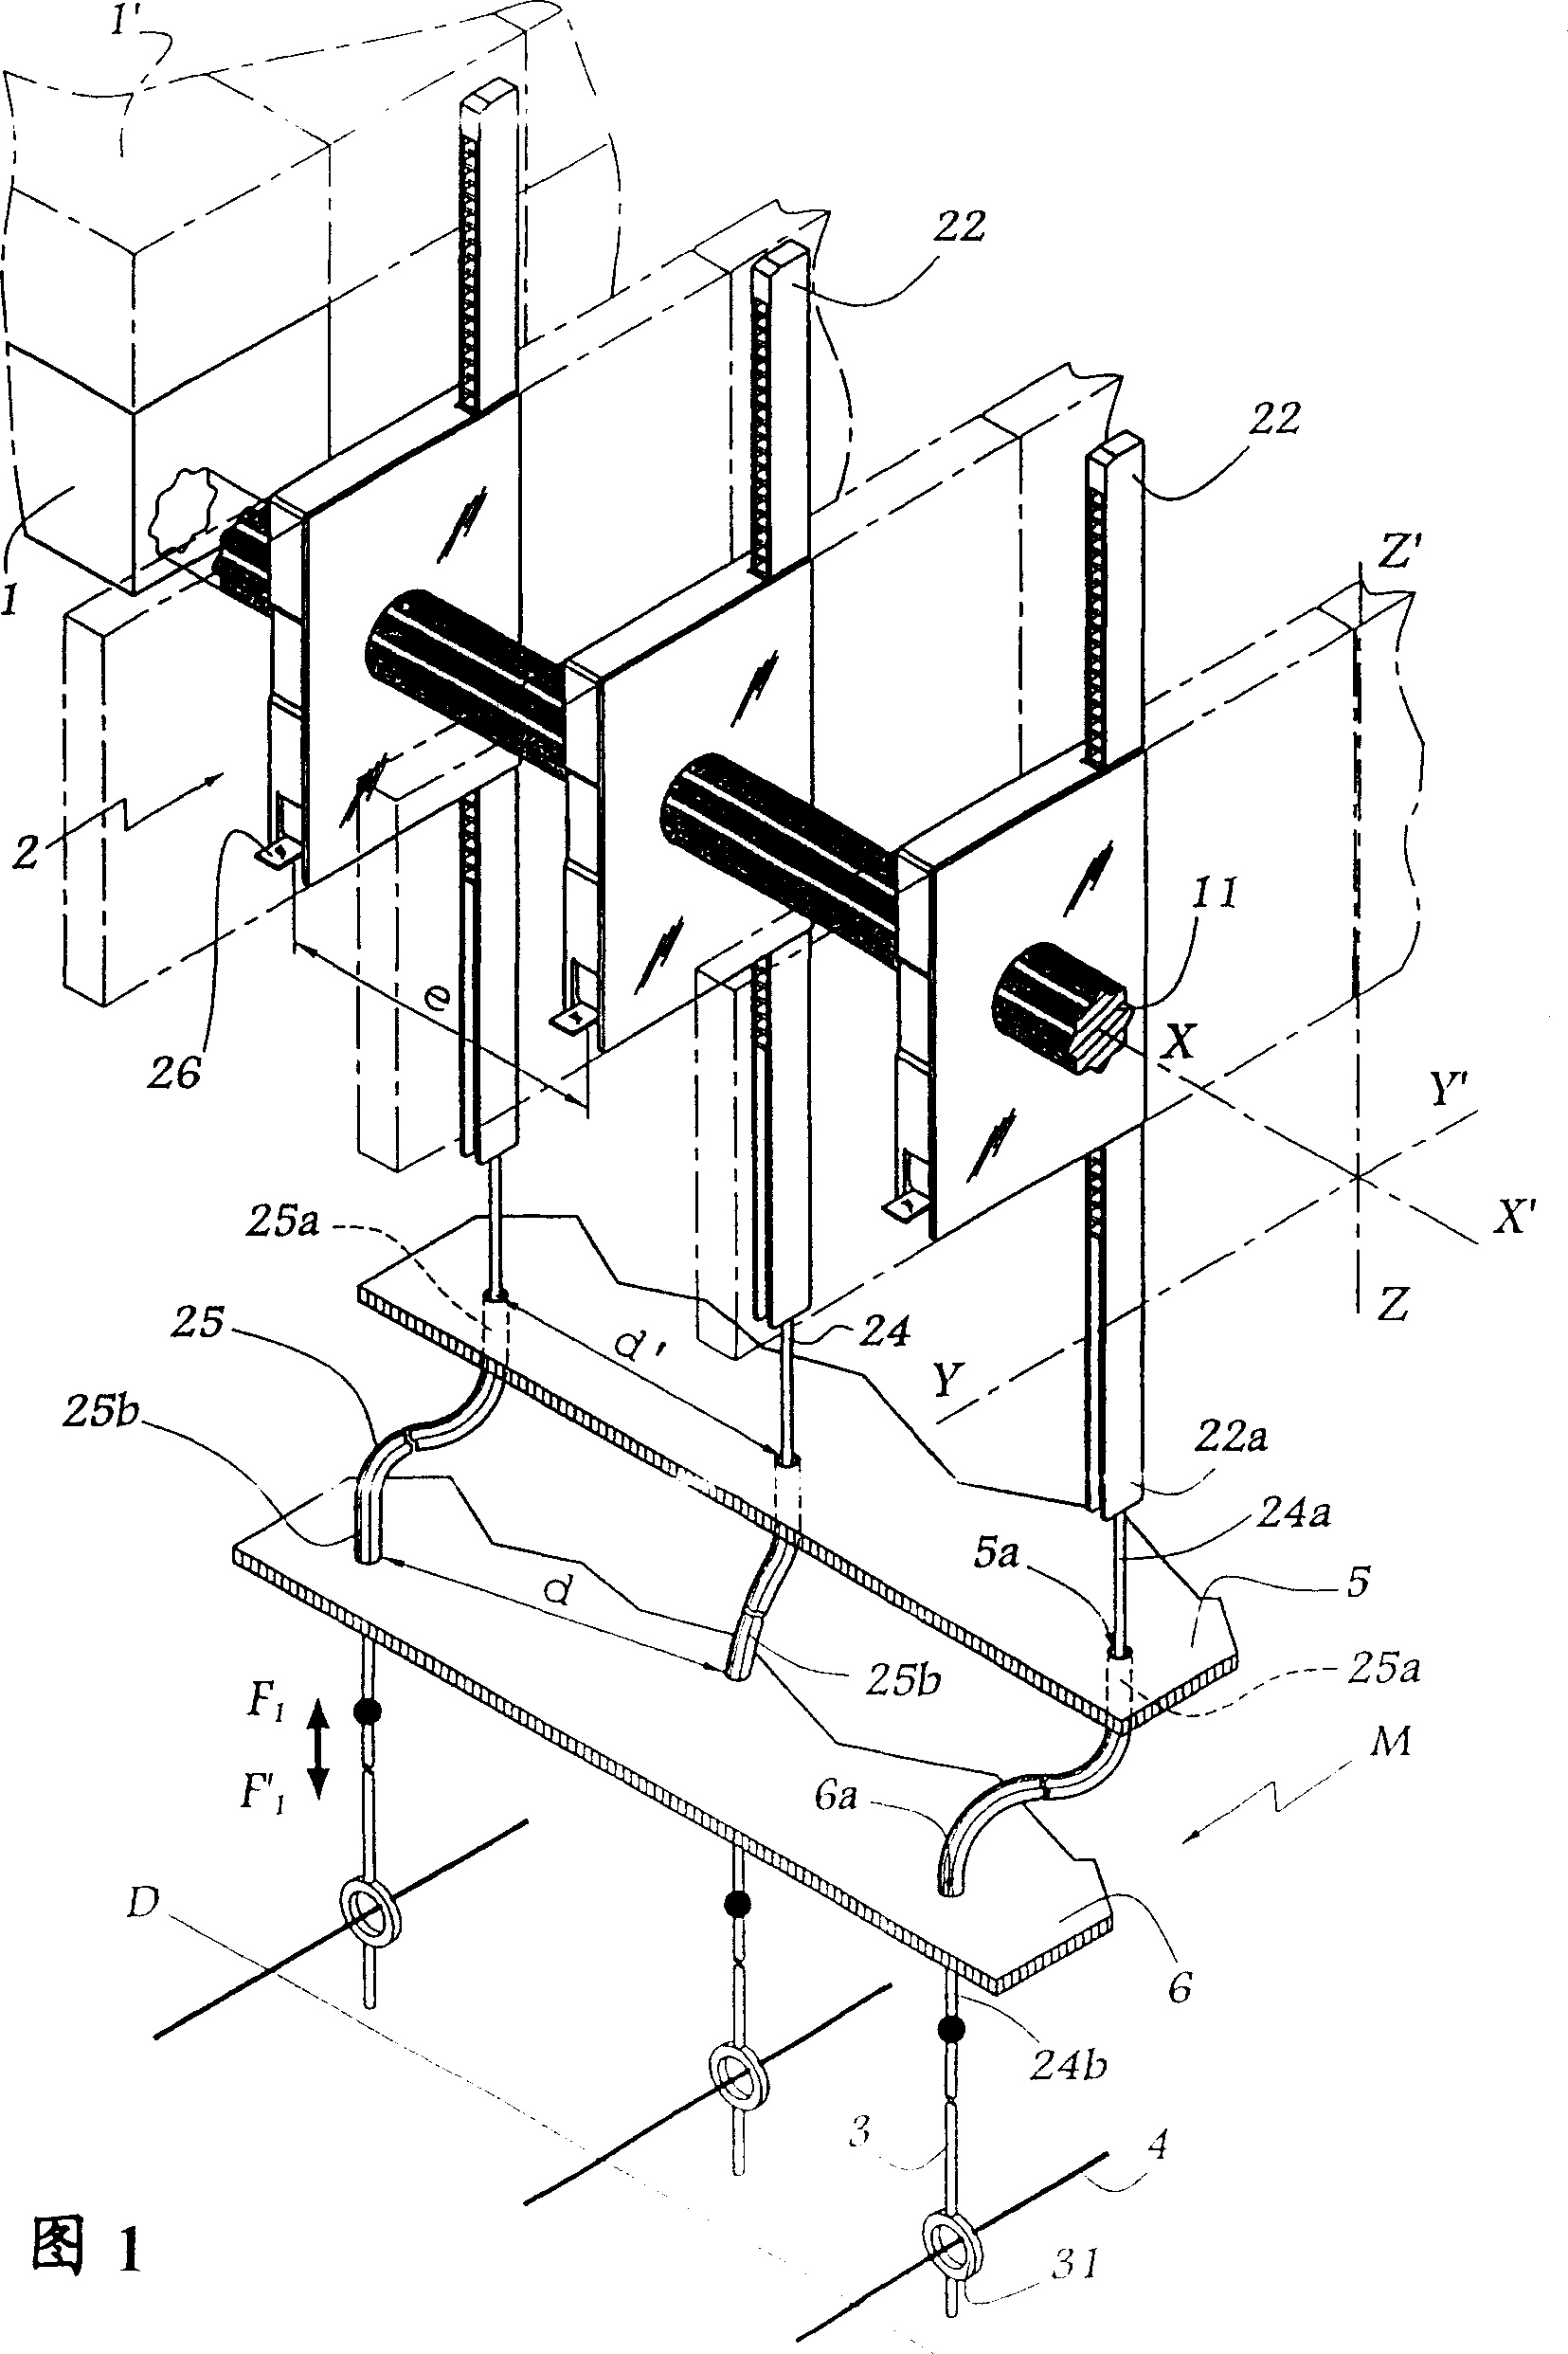 Device for forming shed in weaving loom of jacquard type